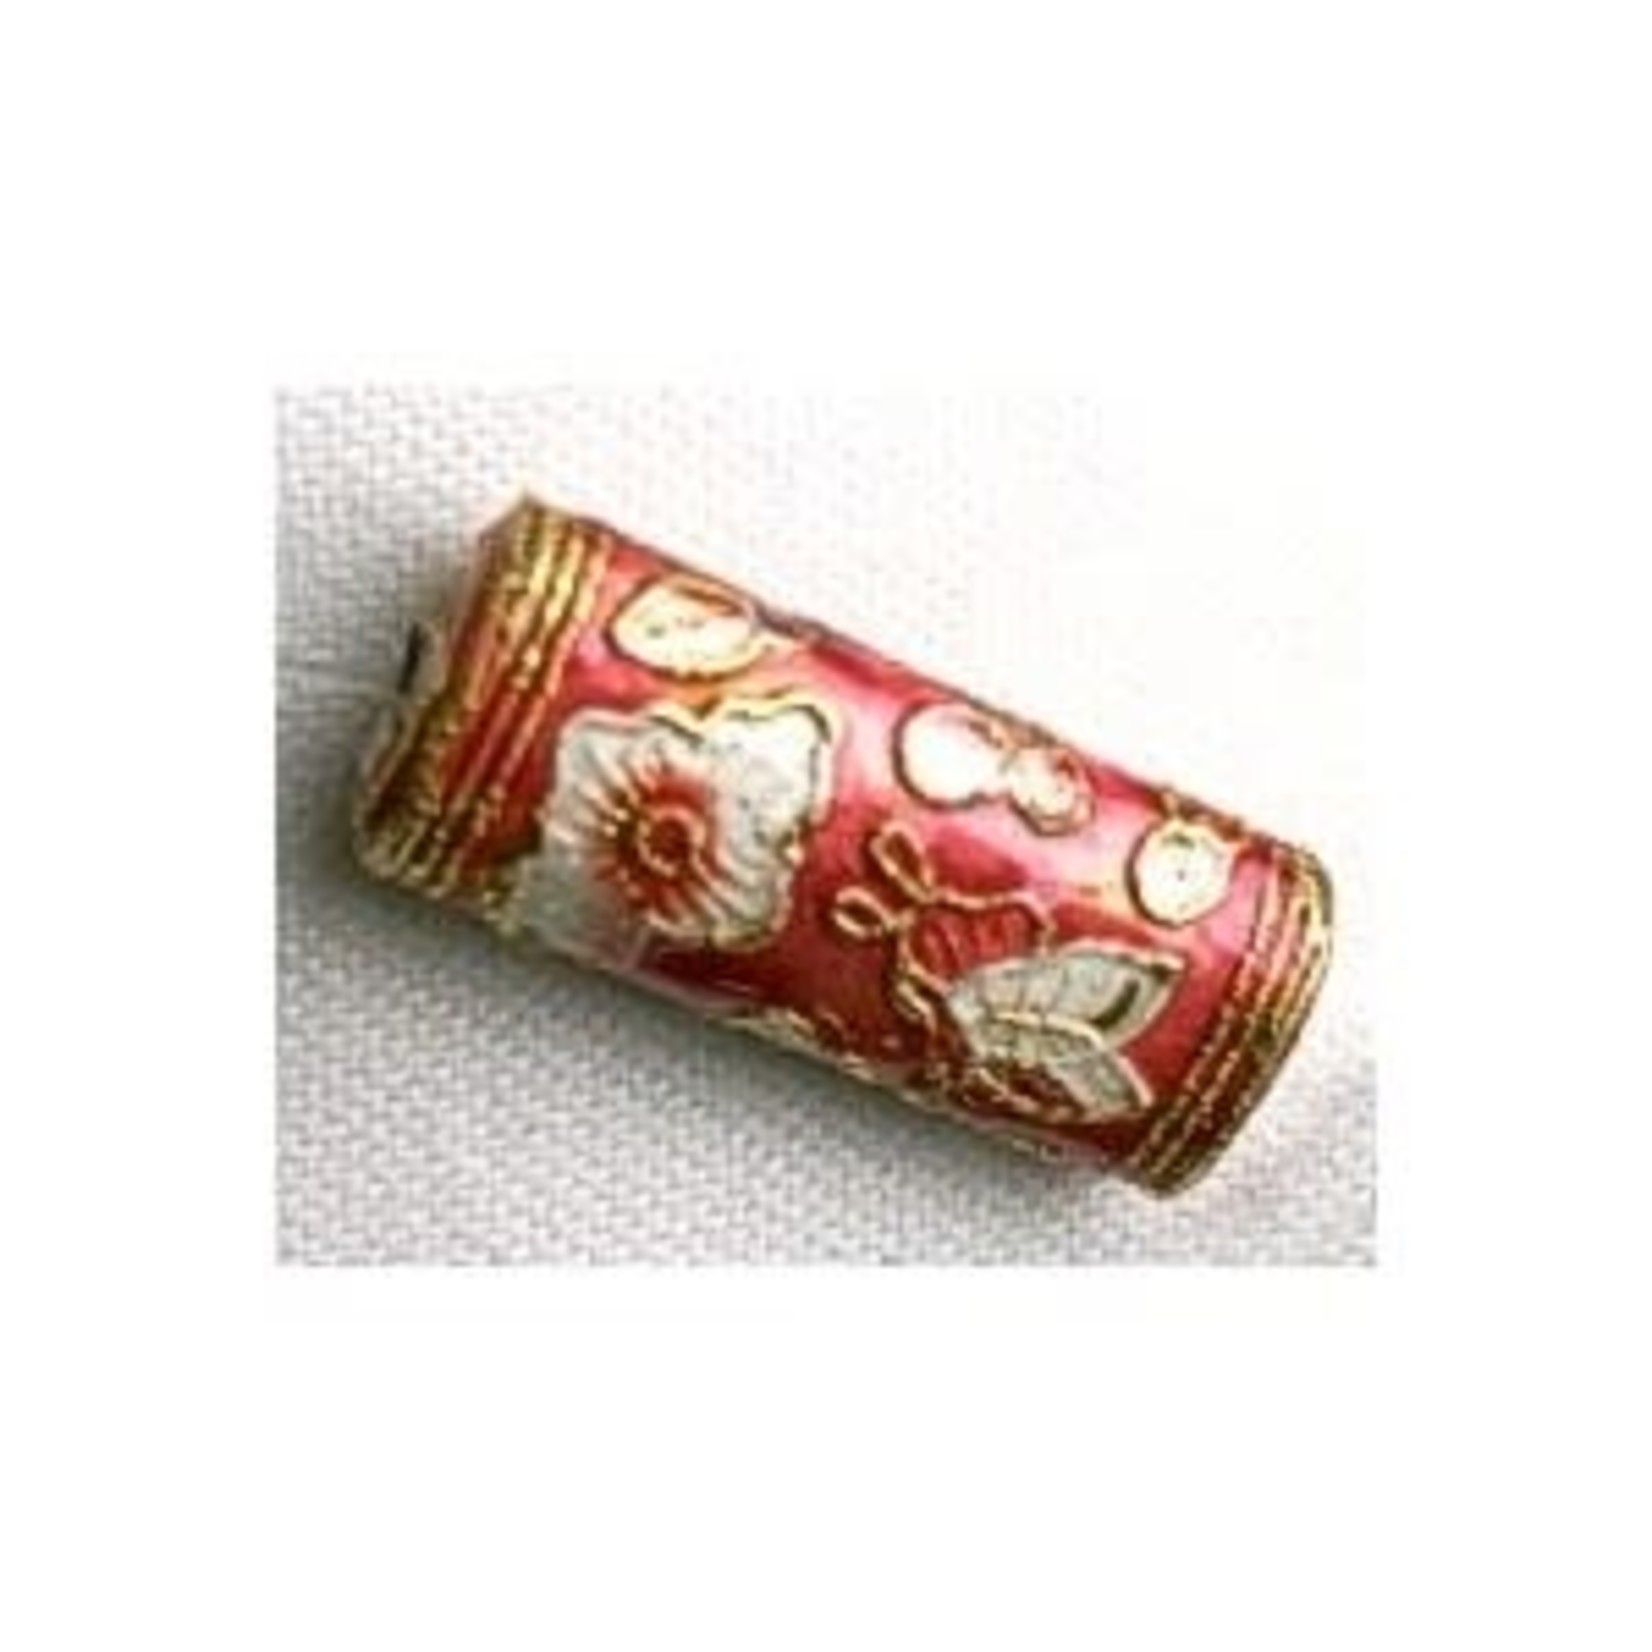 Cloisonne Tube Bead 38x10x8mm - Rust Red with White Flowers